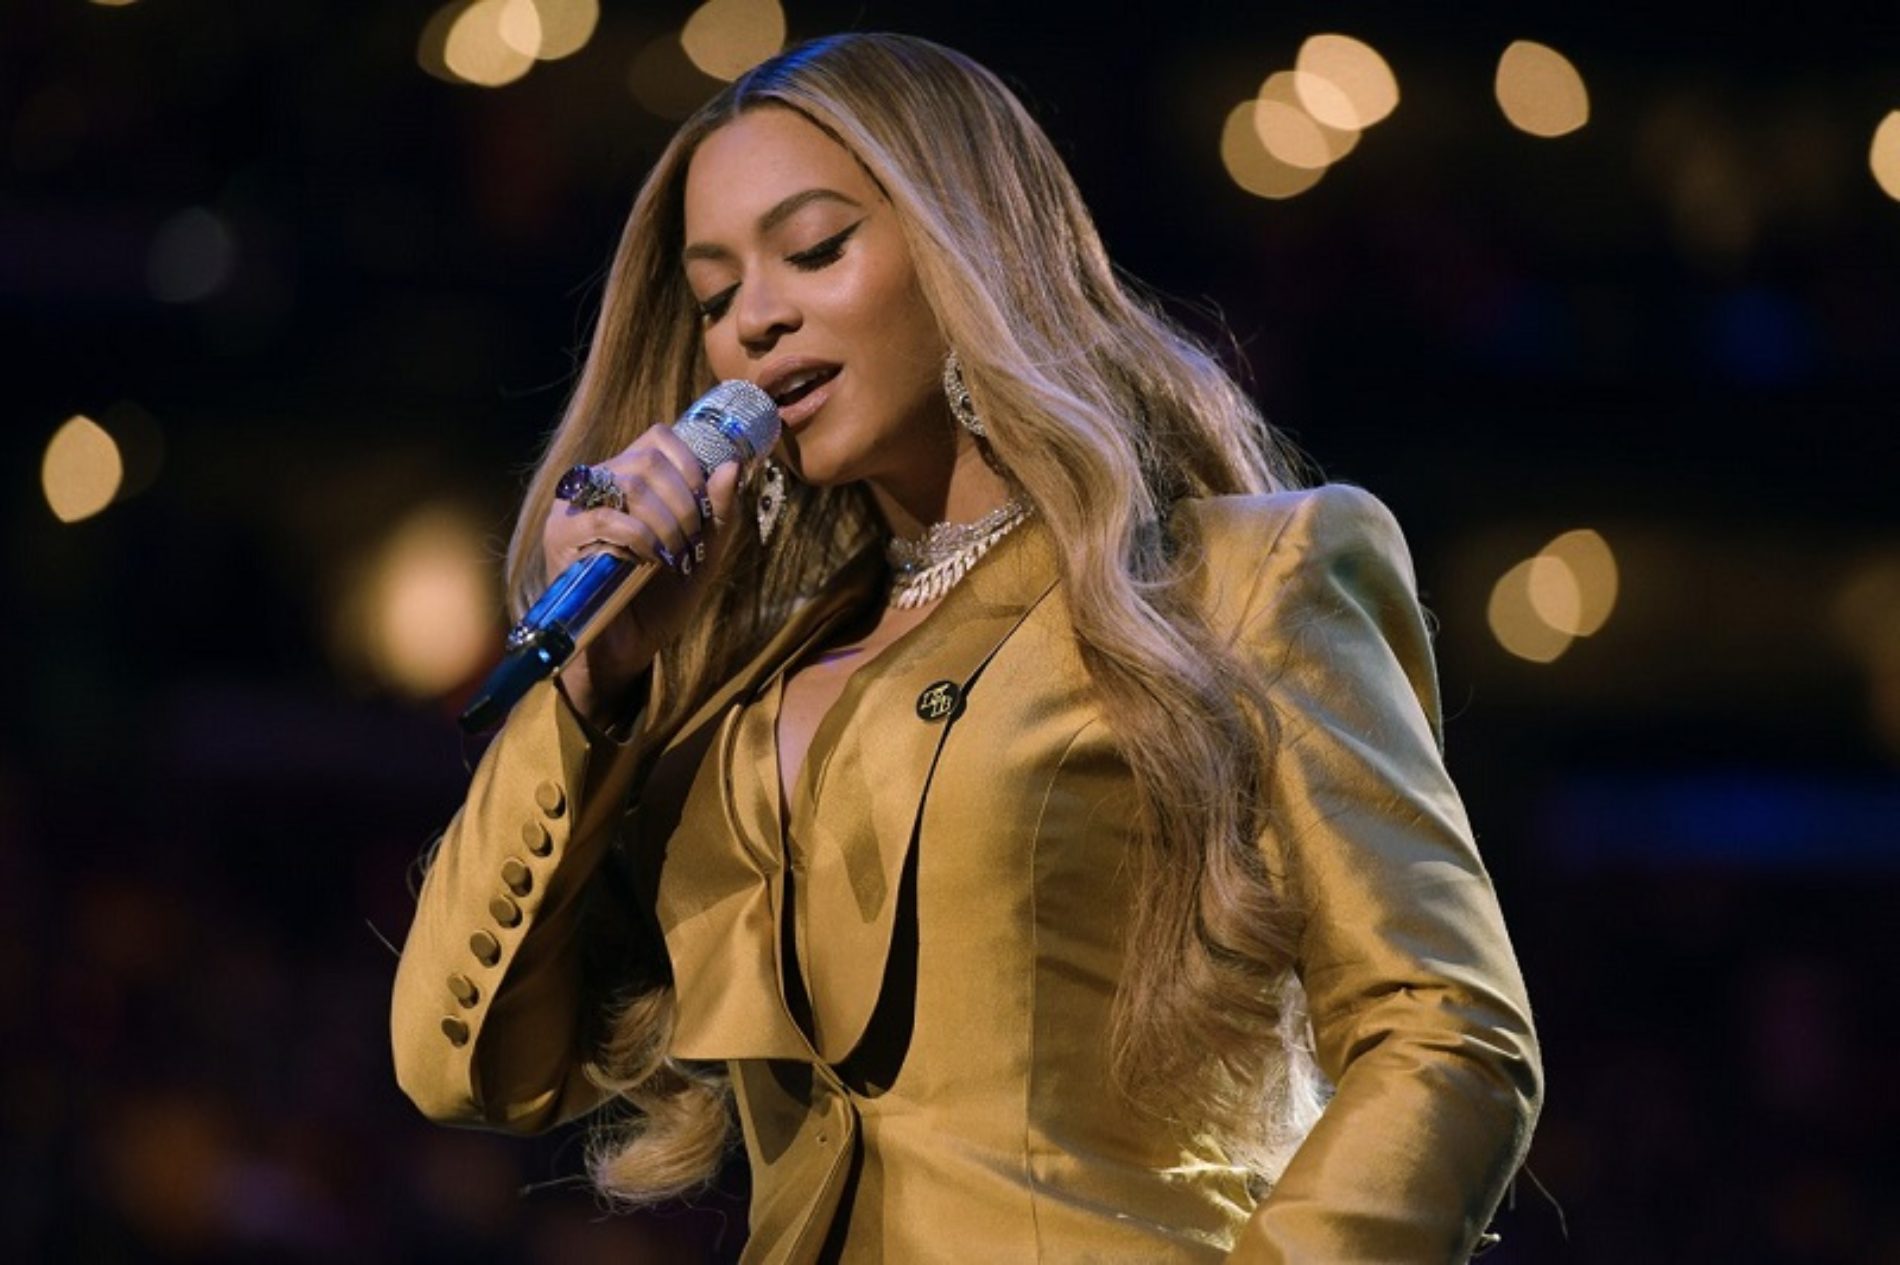 Twitter Reacts To Beyoncé’s Flawless Hair And Makeup During Her Surprise Disney Performance